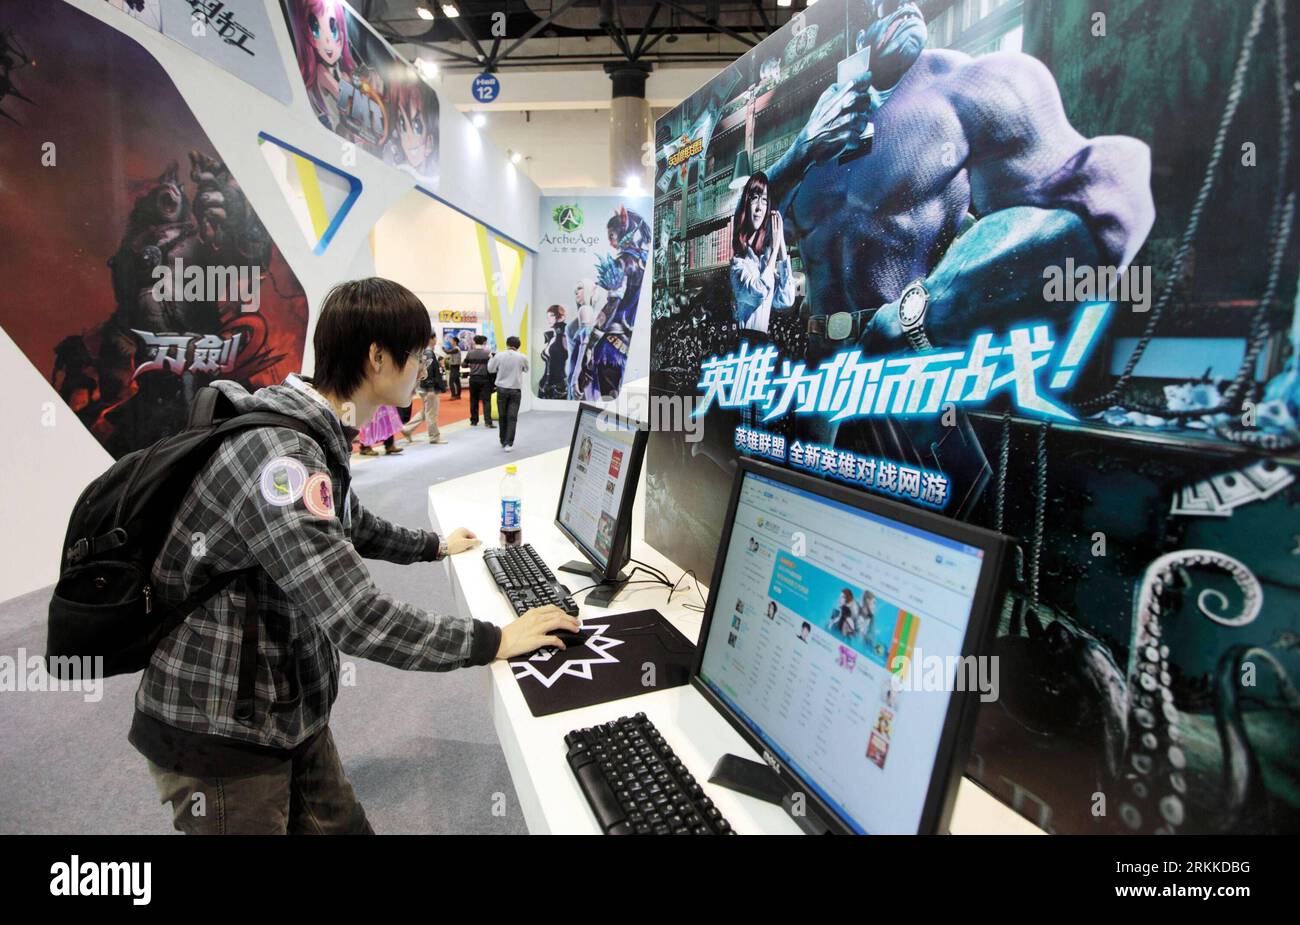 Bildnummer: 56227867  Datum: 28.10.2011  Copyright: imago/Xinhua (111029) -- BEIJING, Oct. 29, 2011 (Xinhua) -- A visitor tries an online game during the expo in Beijing, capital of China, Oct. 28, 2011. The 9th China International Digital Content Expo was held in the Beijing Exhibition Center on Friday. (Xinhua/Luo Wei) (zkr) CHINA-BEIJING-INTERNATIONAL DIGITAL CONTENT EXPO (CN) PUBLICATIONxNOTxINxCHN Gesellschaft x2x xtm 2011 quer o0 Messe Wirtschaft Computerspiel Computerspielmesse     56227867 Date 28 10 2011 Copyright Imago XINHUA  Beijing OCT 29 2011 XINHUA a Visitor tries to Online Game Stock Photo